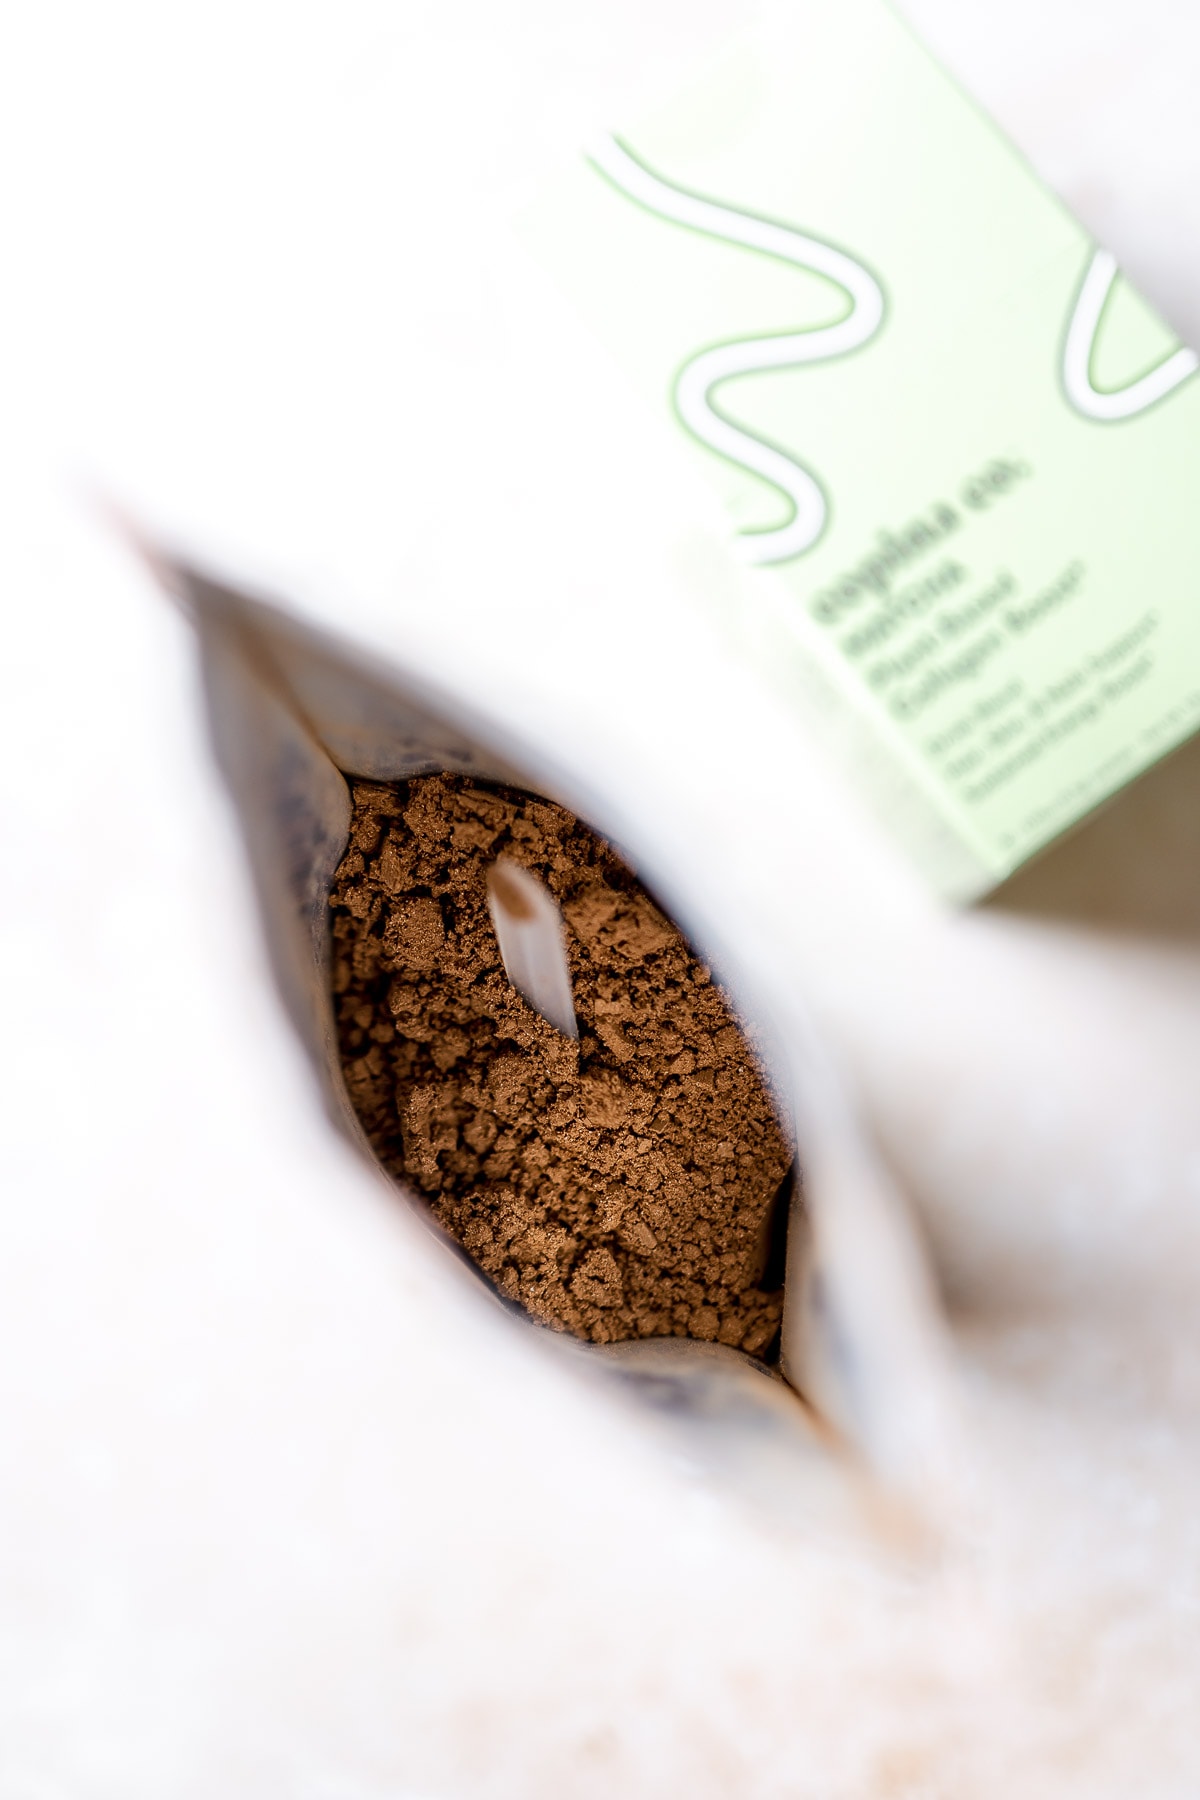 An open bag filled with a brown cacao powder.